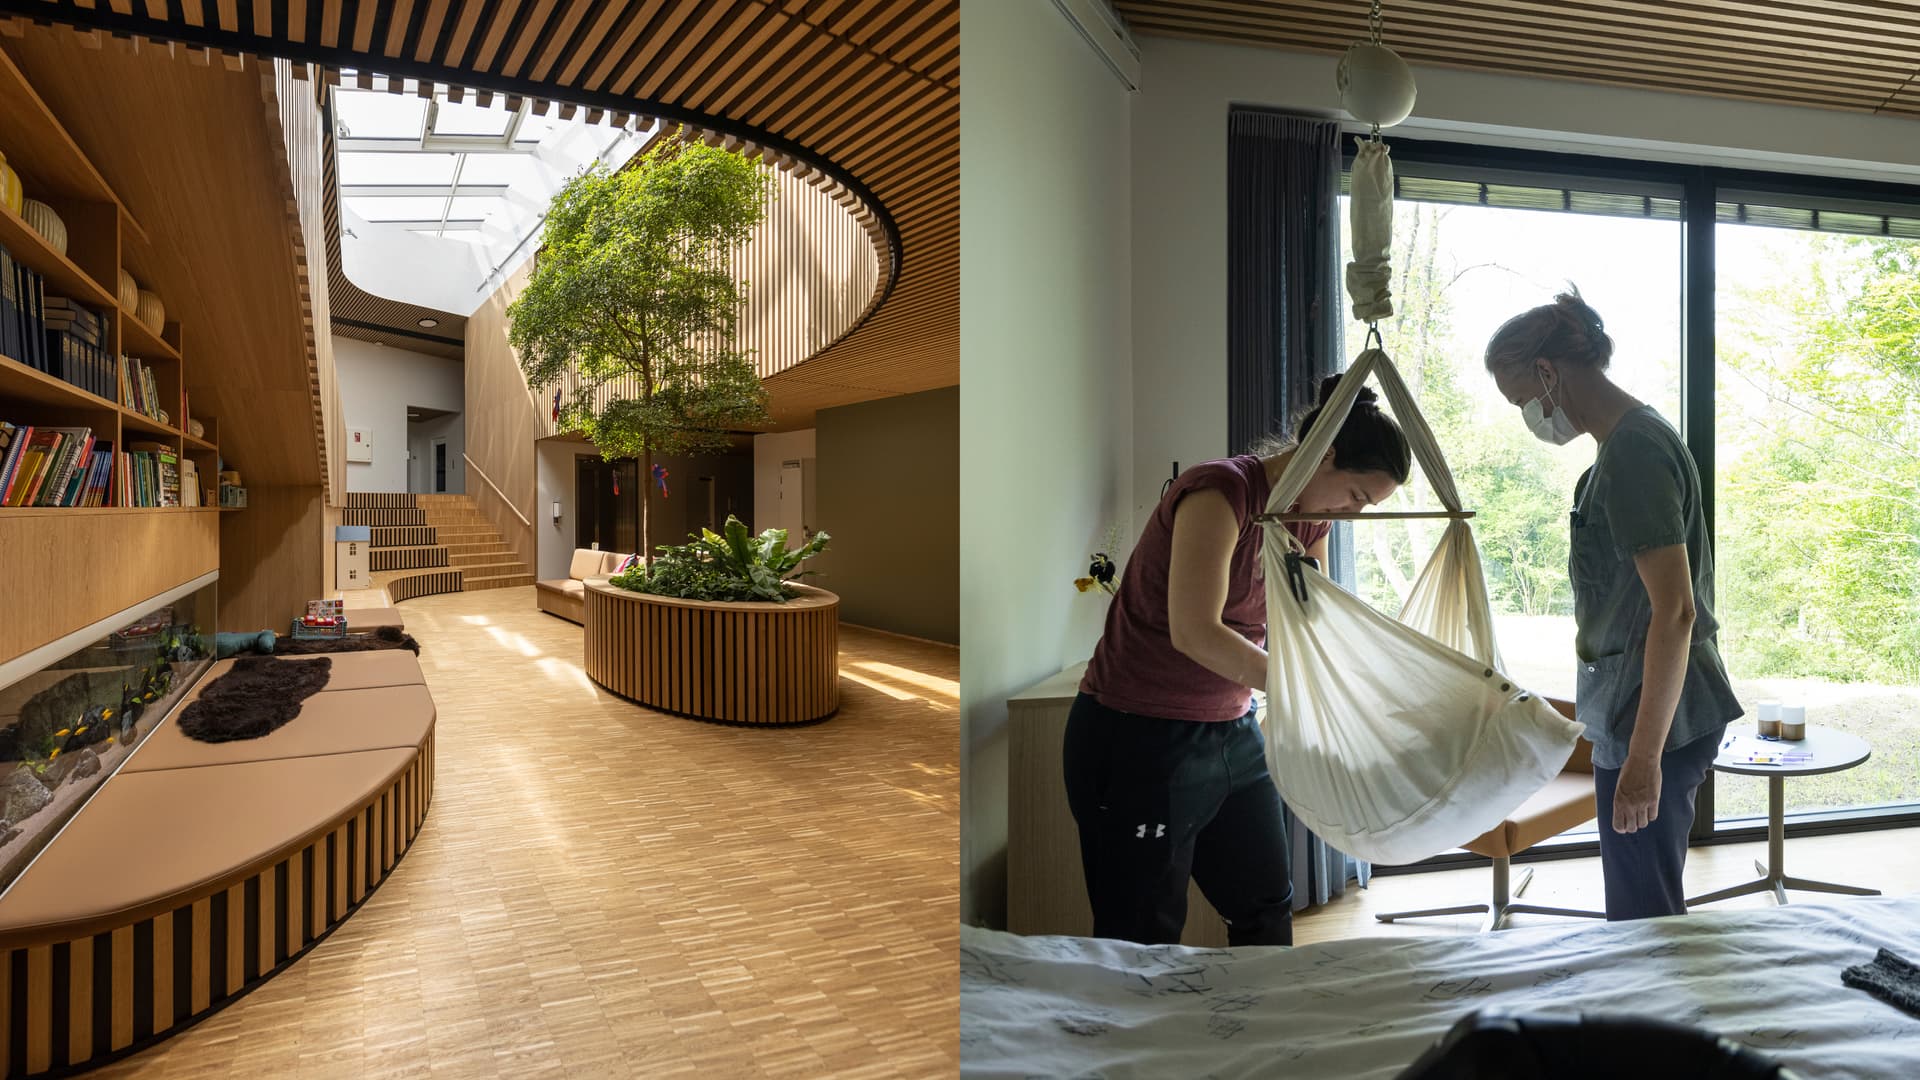 The Children's and Young People's Hospice Strandbakkehuset has been designed to provide a better life for families in a vulnerable situation